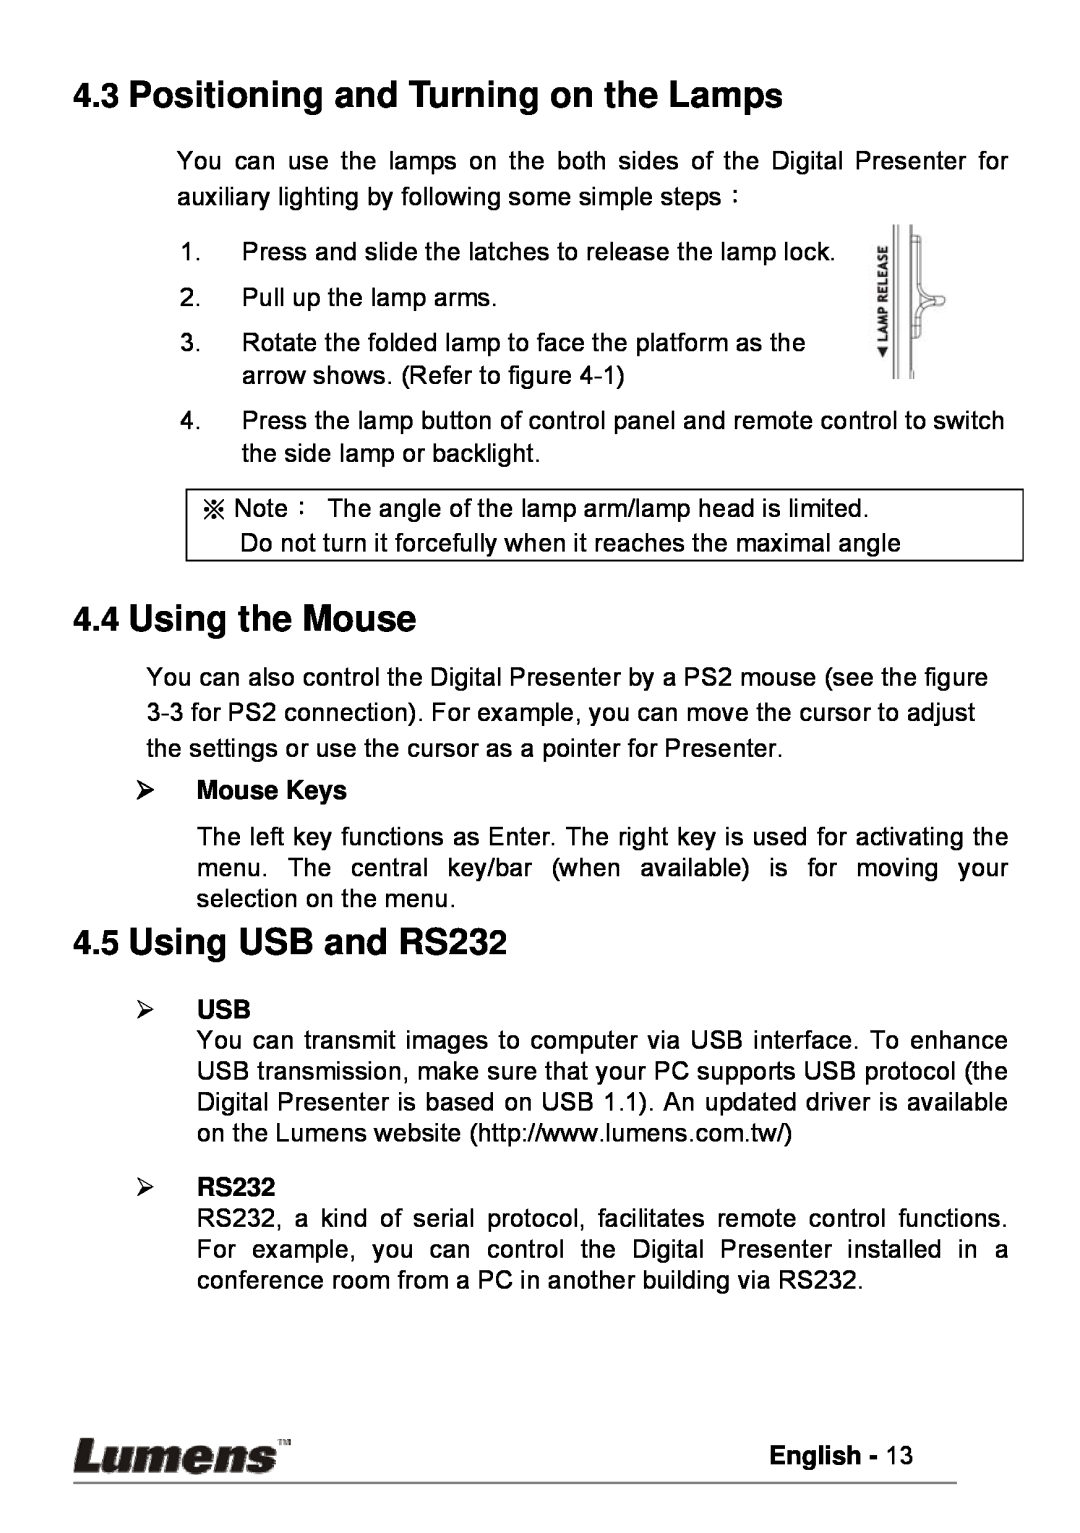 Lumens Technology PS600 Positioning and Turning on the Lamps, Using the Mouse, Using USB and RS232, ¾ Mouse Keys, ¾ USB 